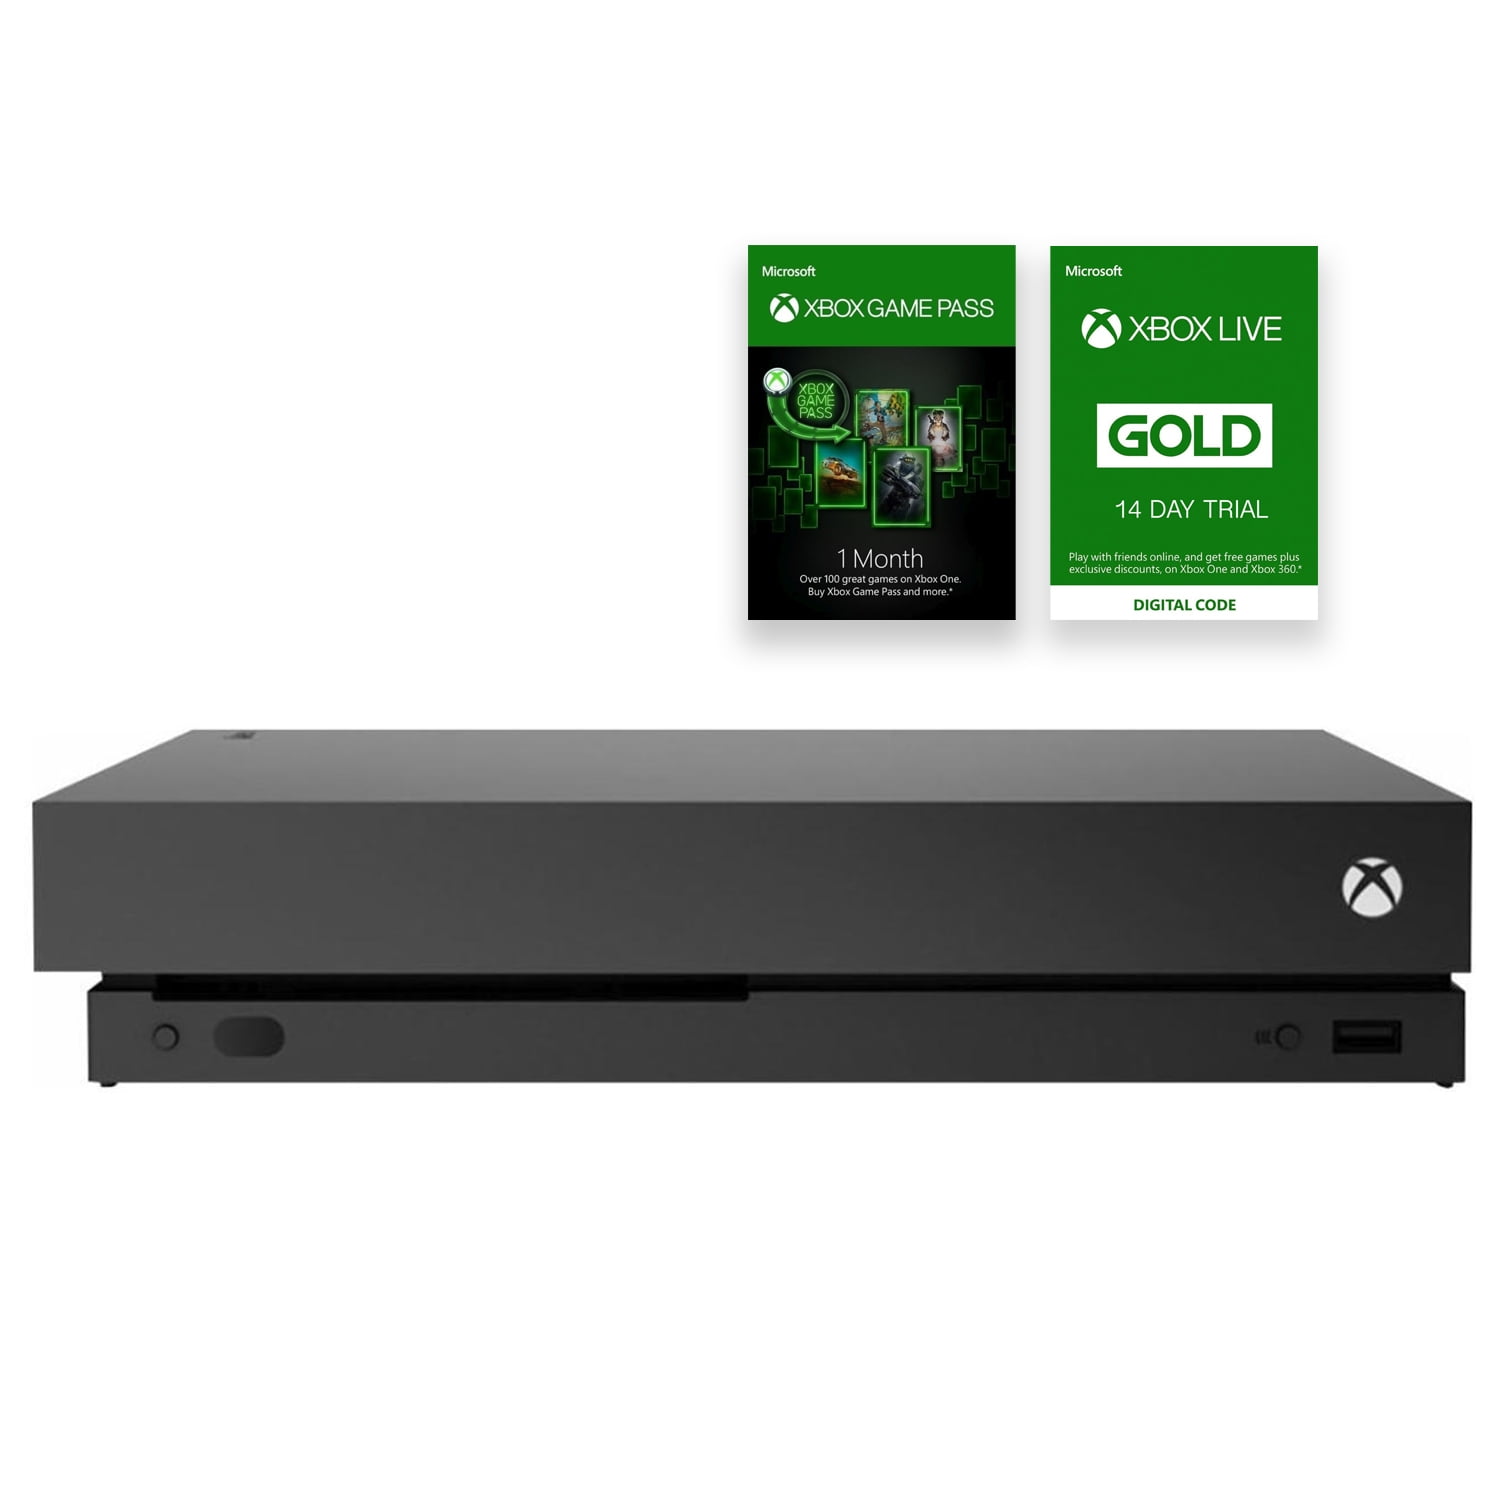 Microsoft Xbox One X 2TB Solid State Hybrid Drive Gaming Console with Wirless Controller HDR Enhanced by Scorpio CPU and Fast SSHD Black Native 4K 